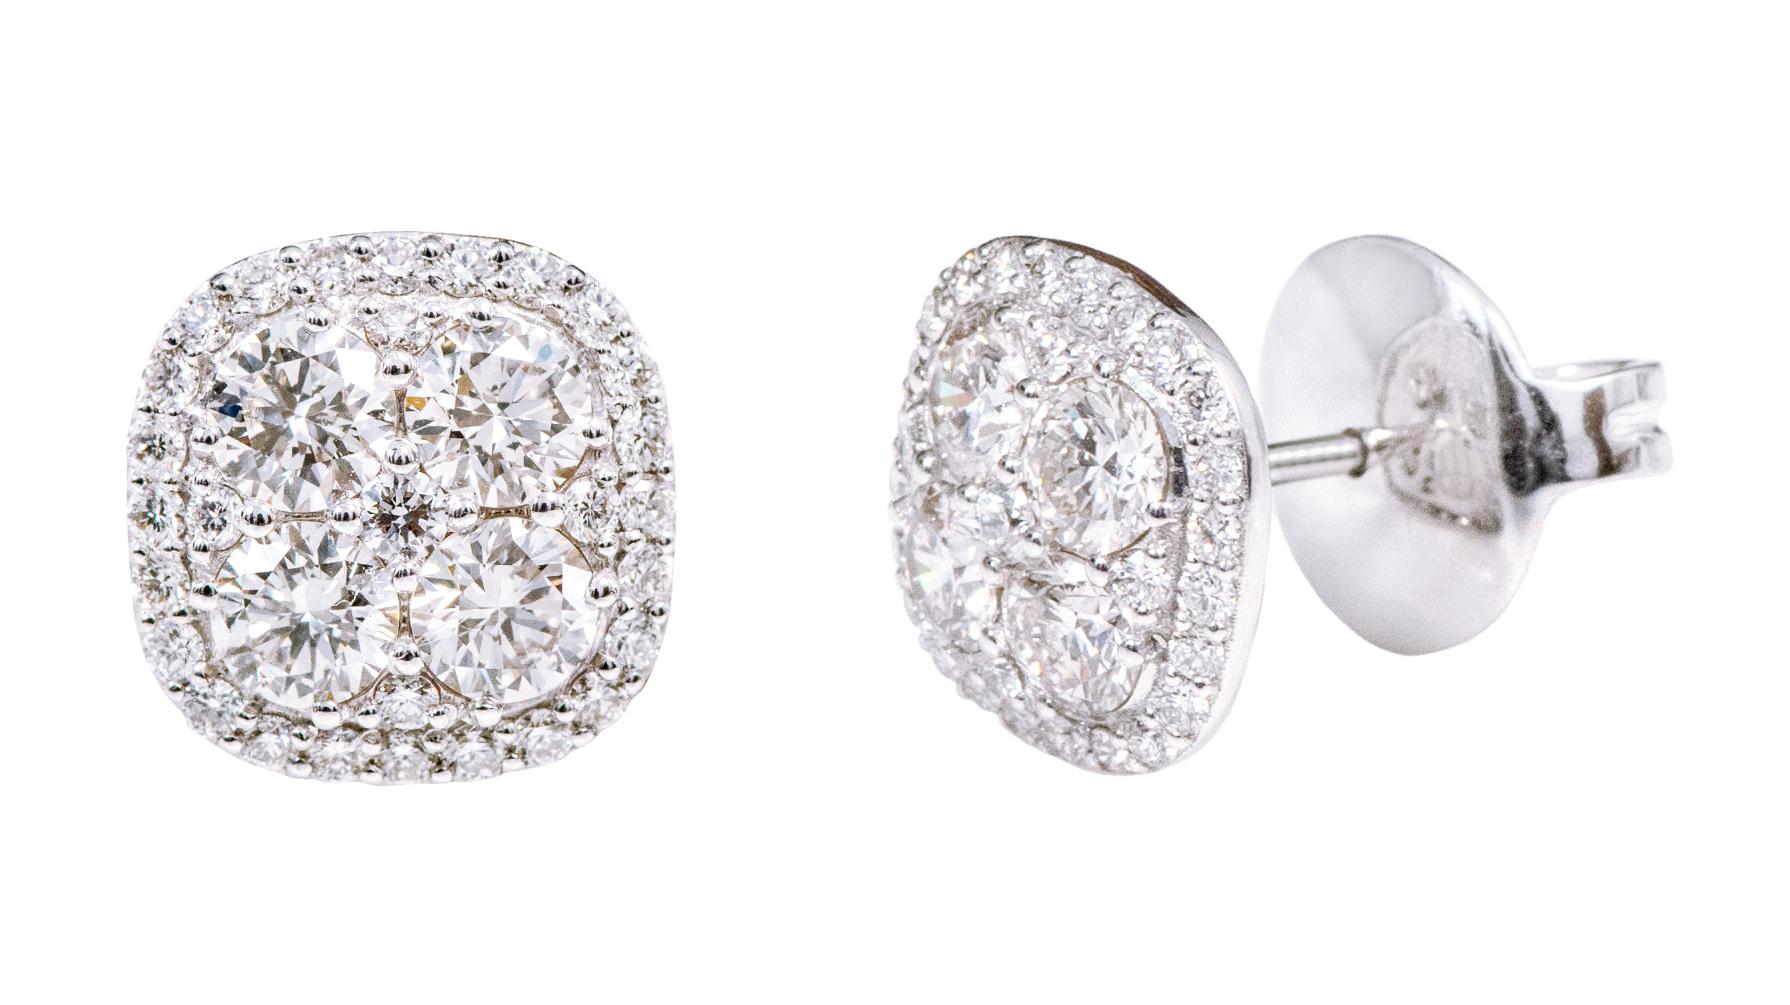 18 Karat White Gold 1.98 Carat Brilliant-Cut Diamond Stud Earrings

This exquisite new style invisible set cushion shaped diamond stud earring is terrific. The cushion cut diamond design formed in solid white gold is impressive wherein 4 solitaire